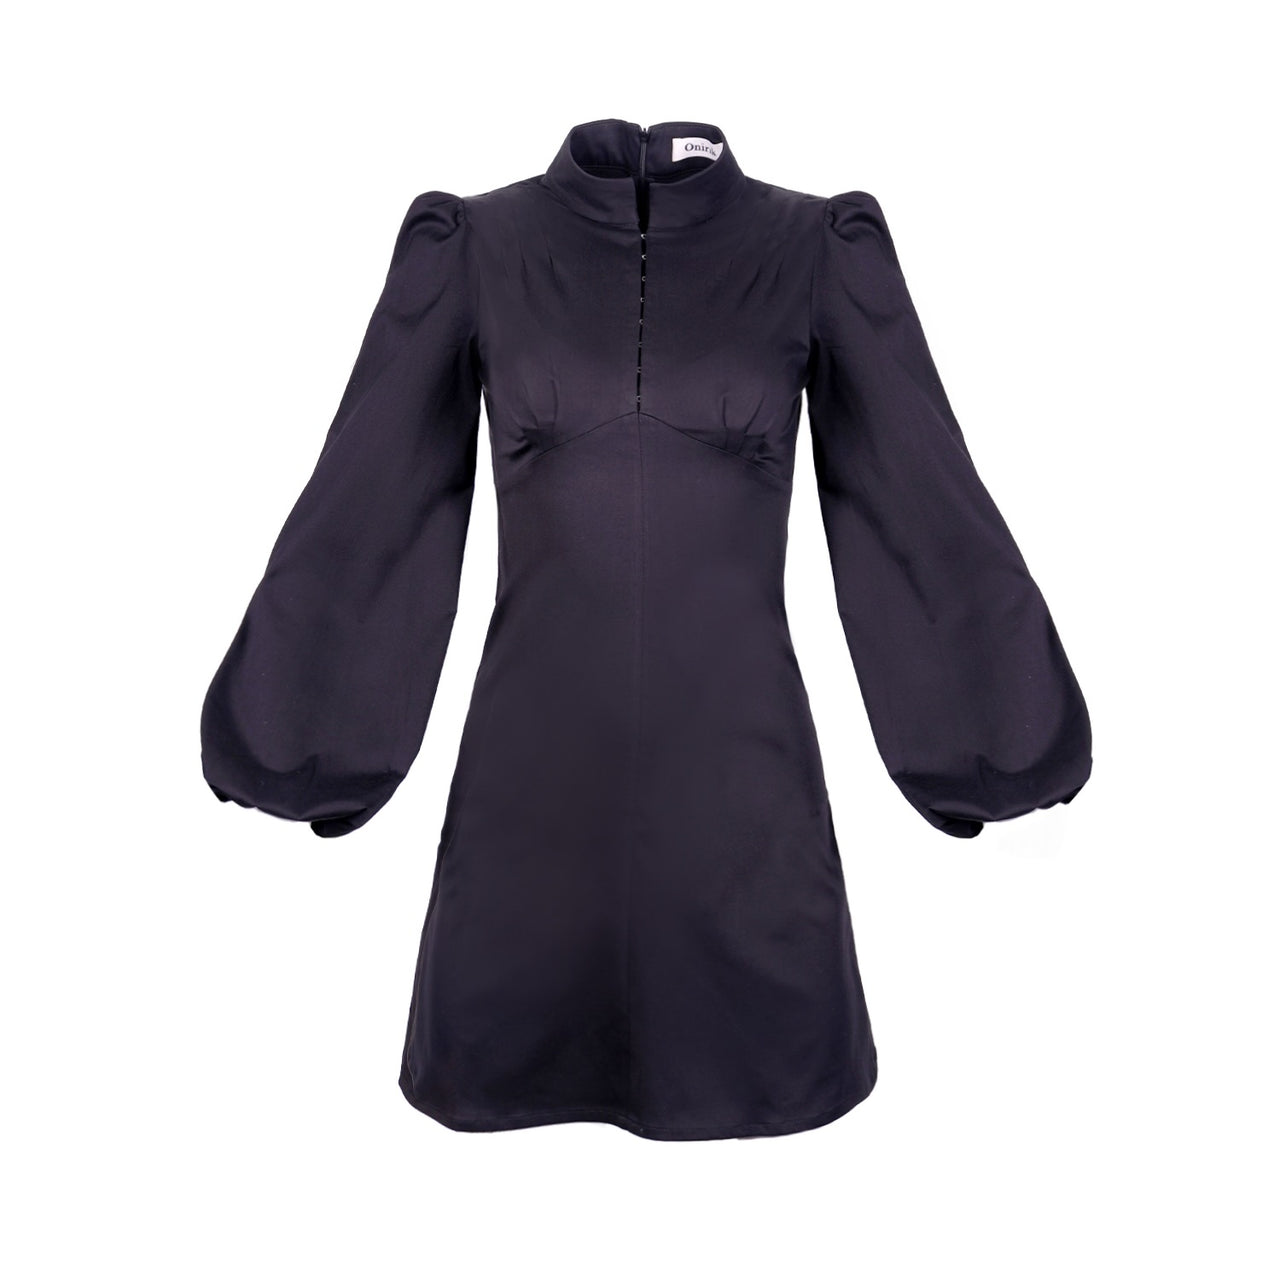 Jane High Neck Empire Mini Dress with Hook and Eye Detail and Blouson Sleeves / Black Cotton